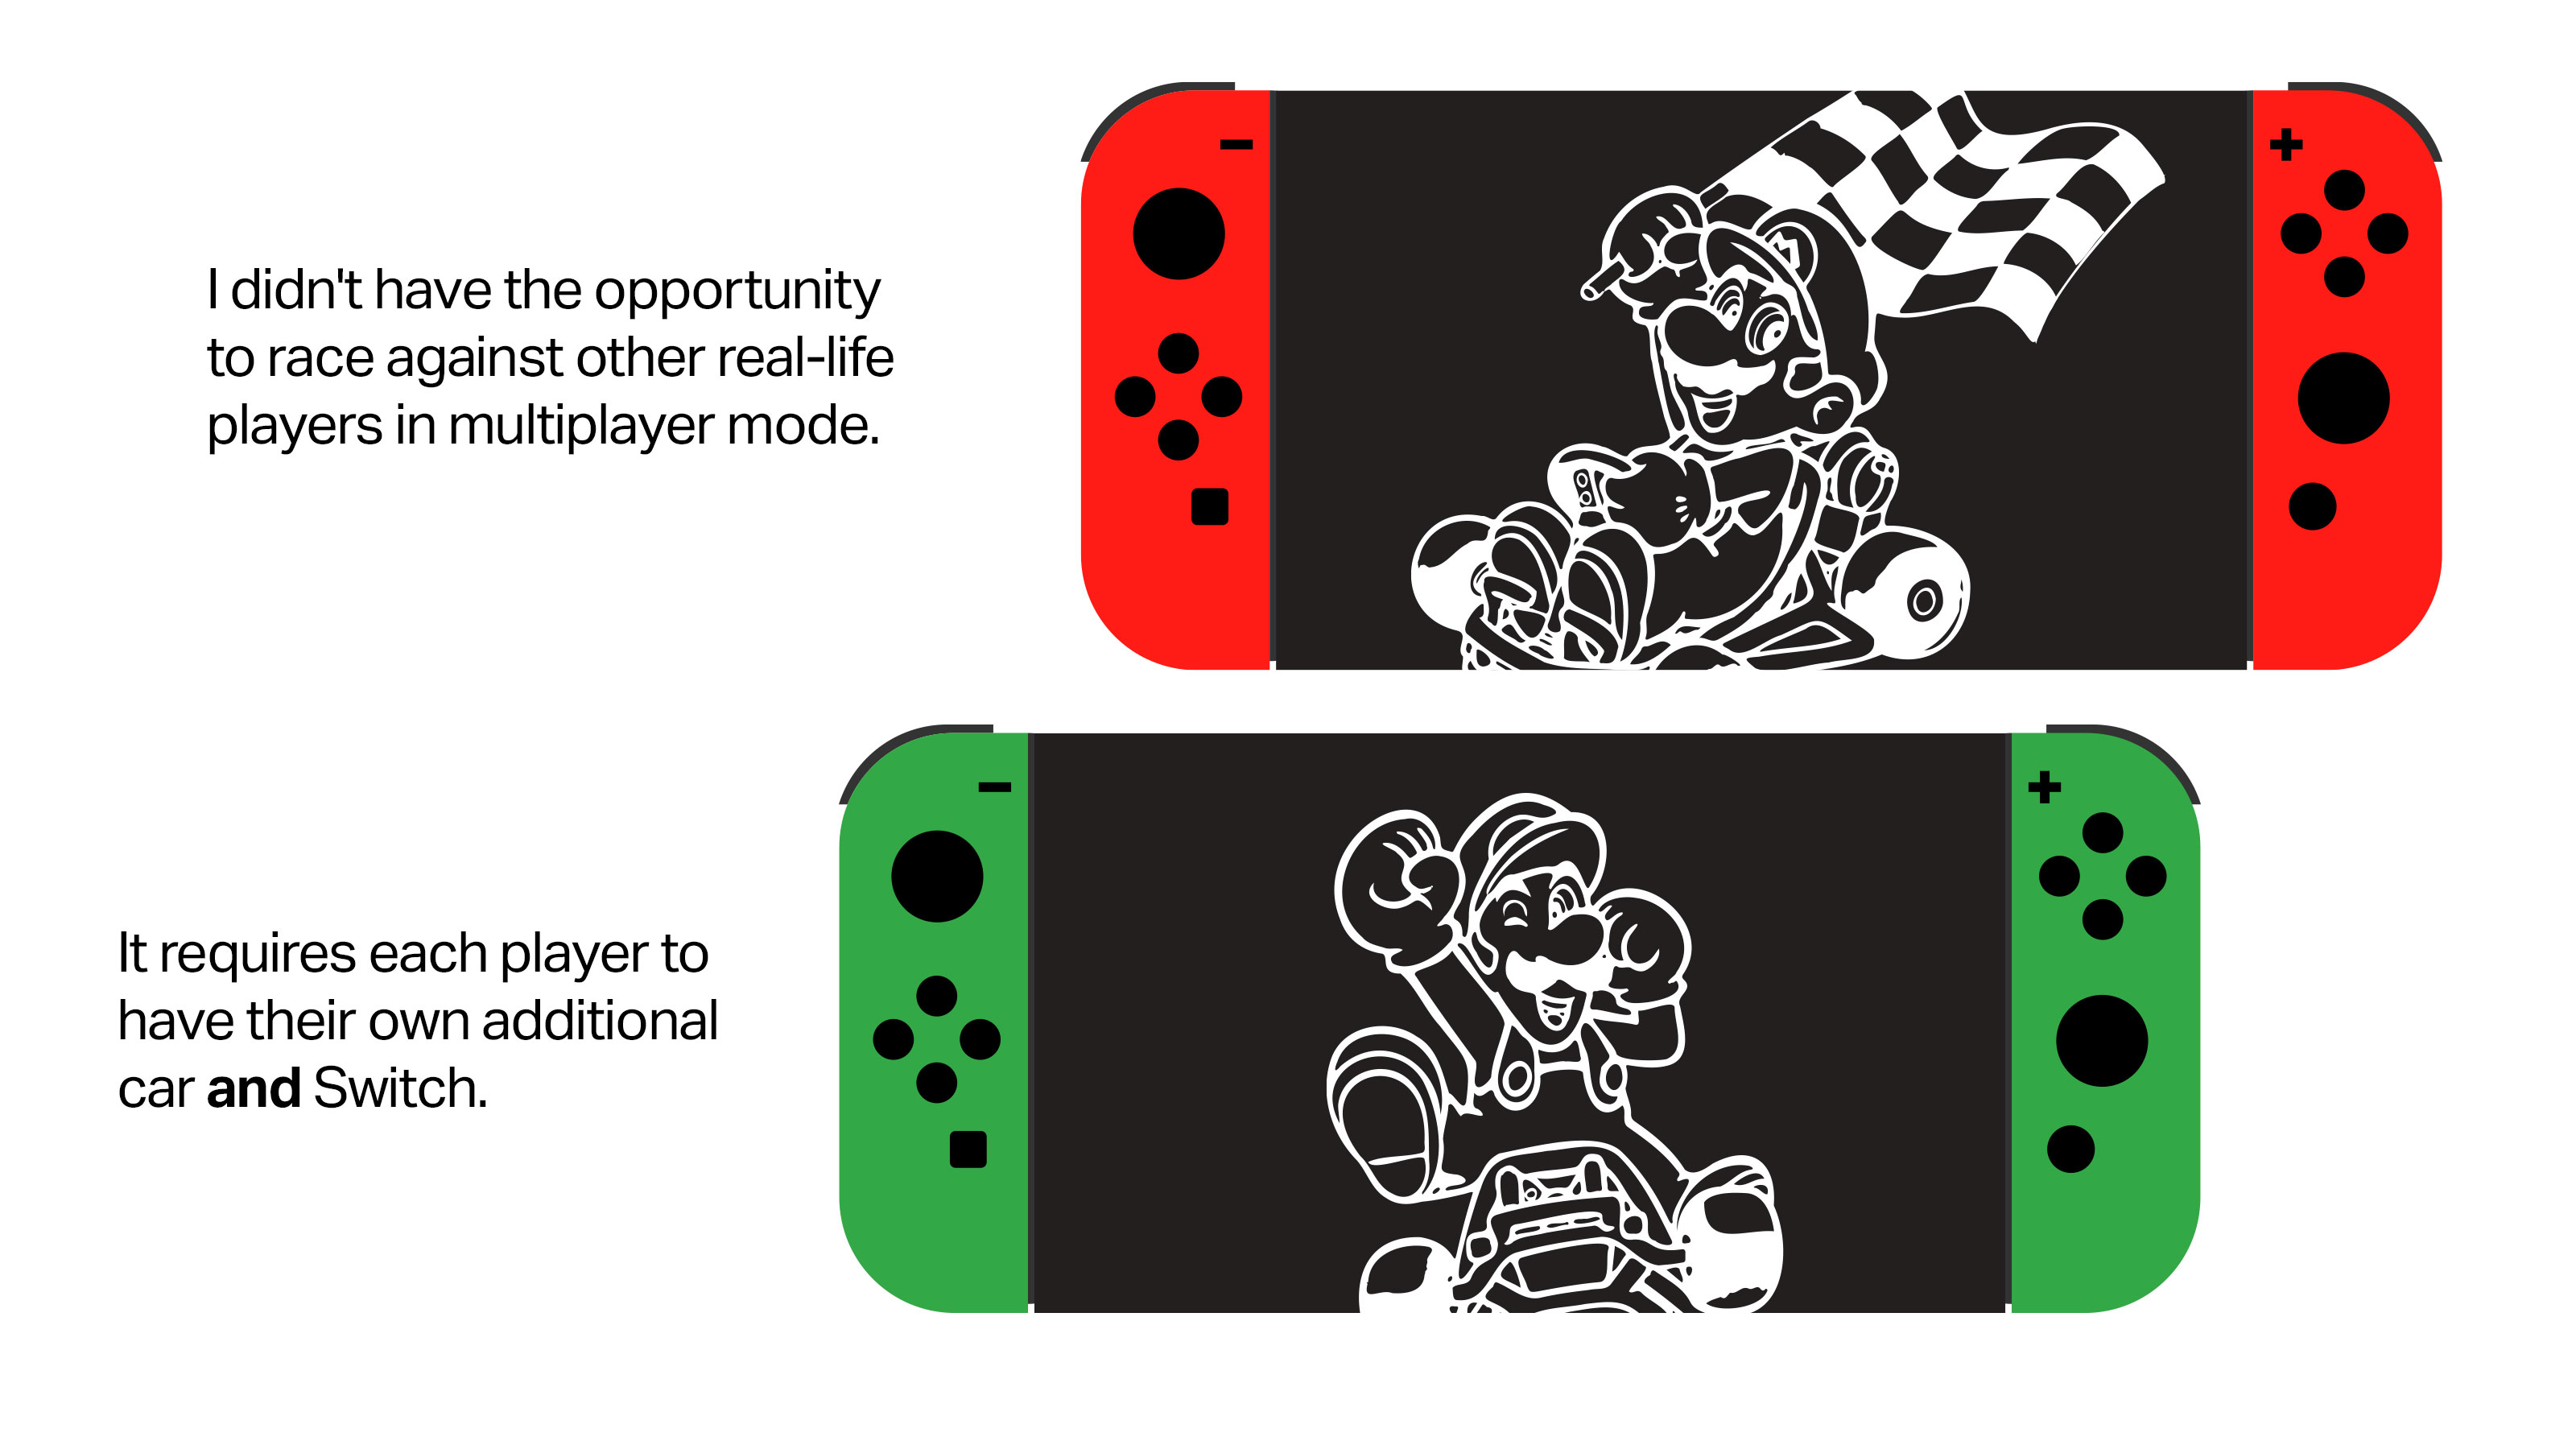 Text: I didn't have the opportunity to race against other real-life players in multiplayer mode. It requires each player to have their own additional car *and* Switch. [Image: Mario and Luigi racers, two Nintendo Switches]